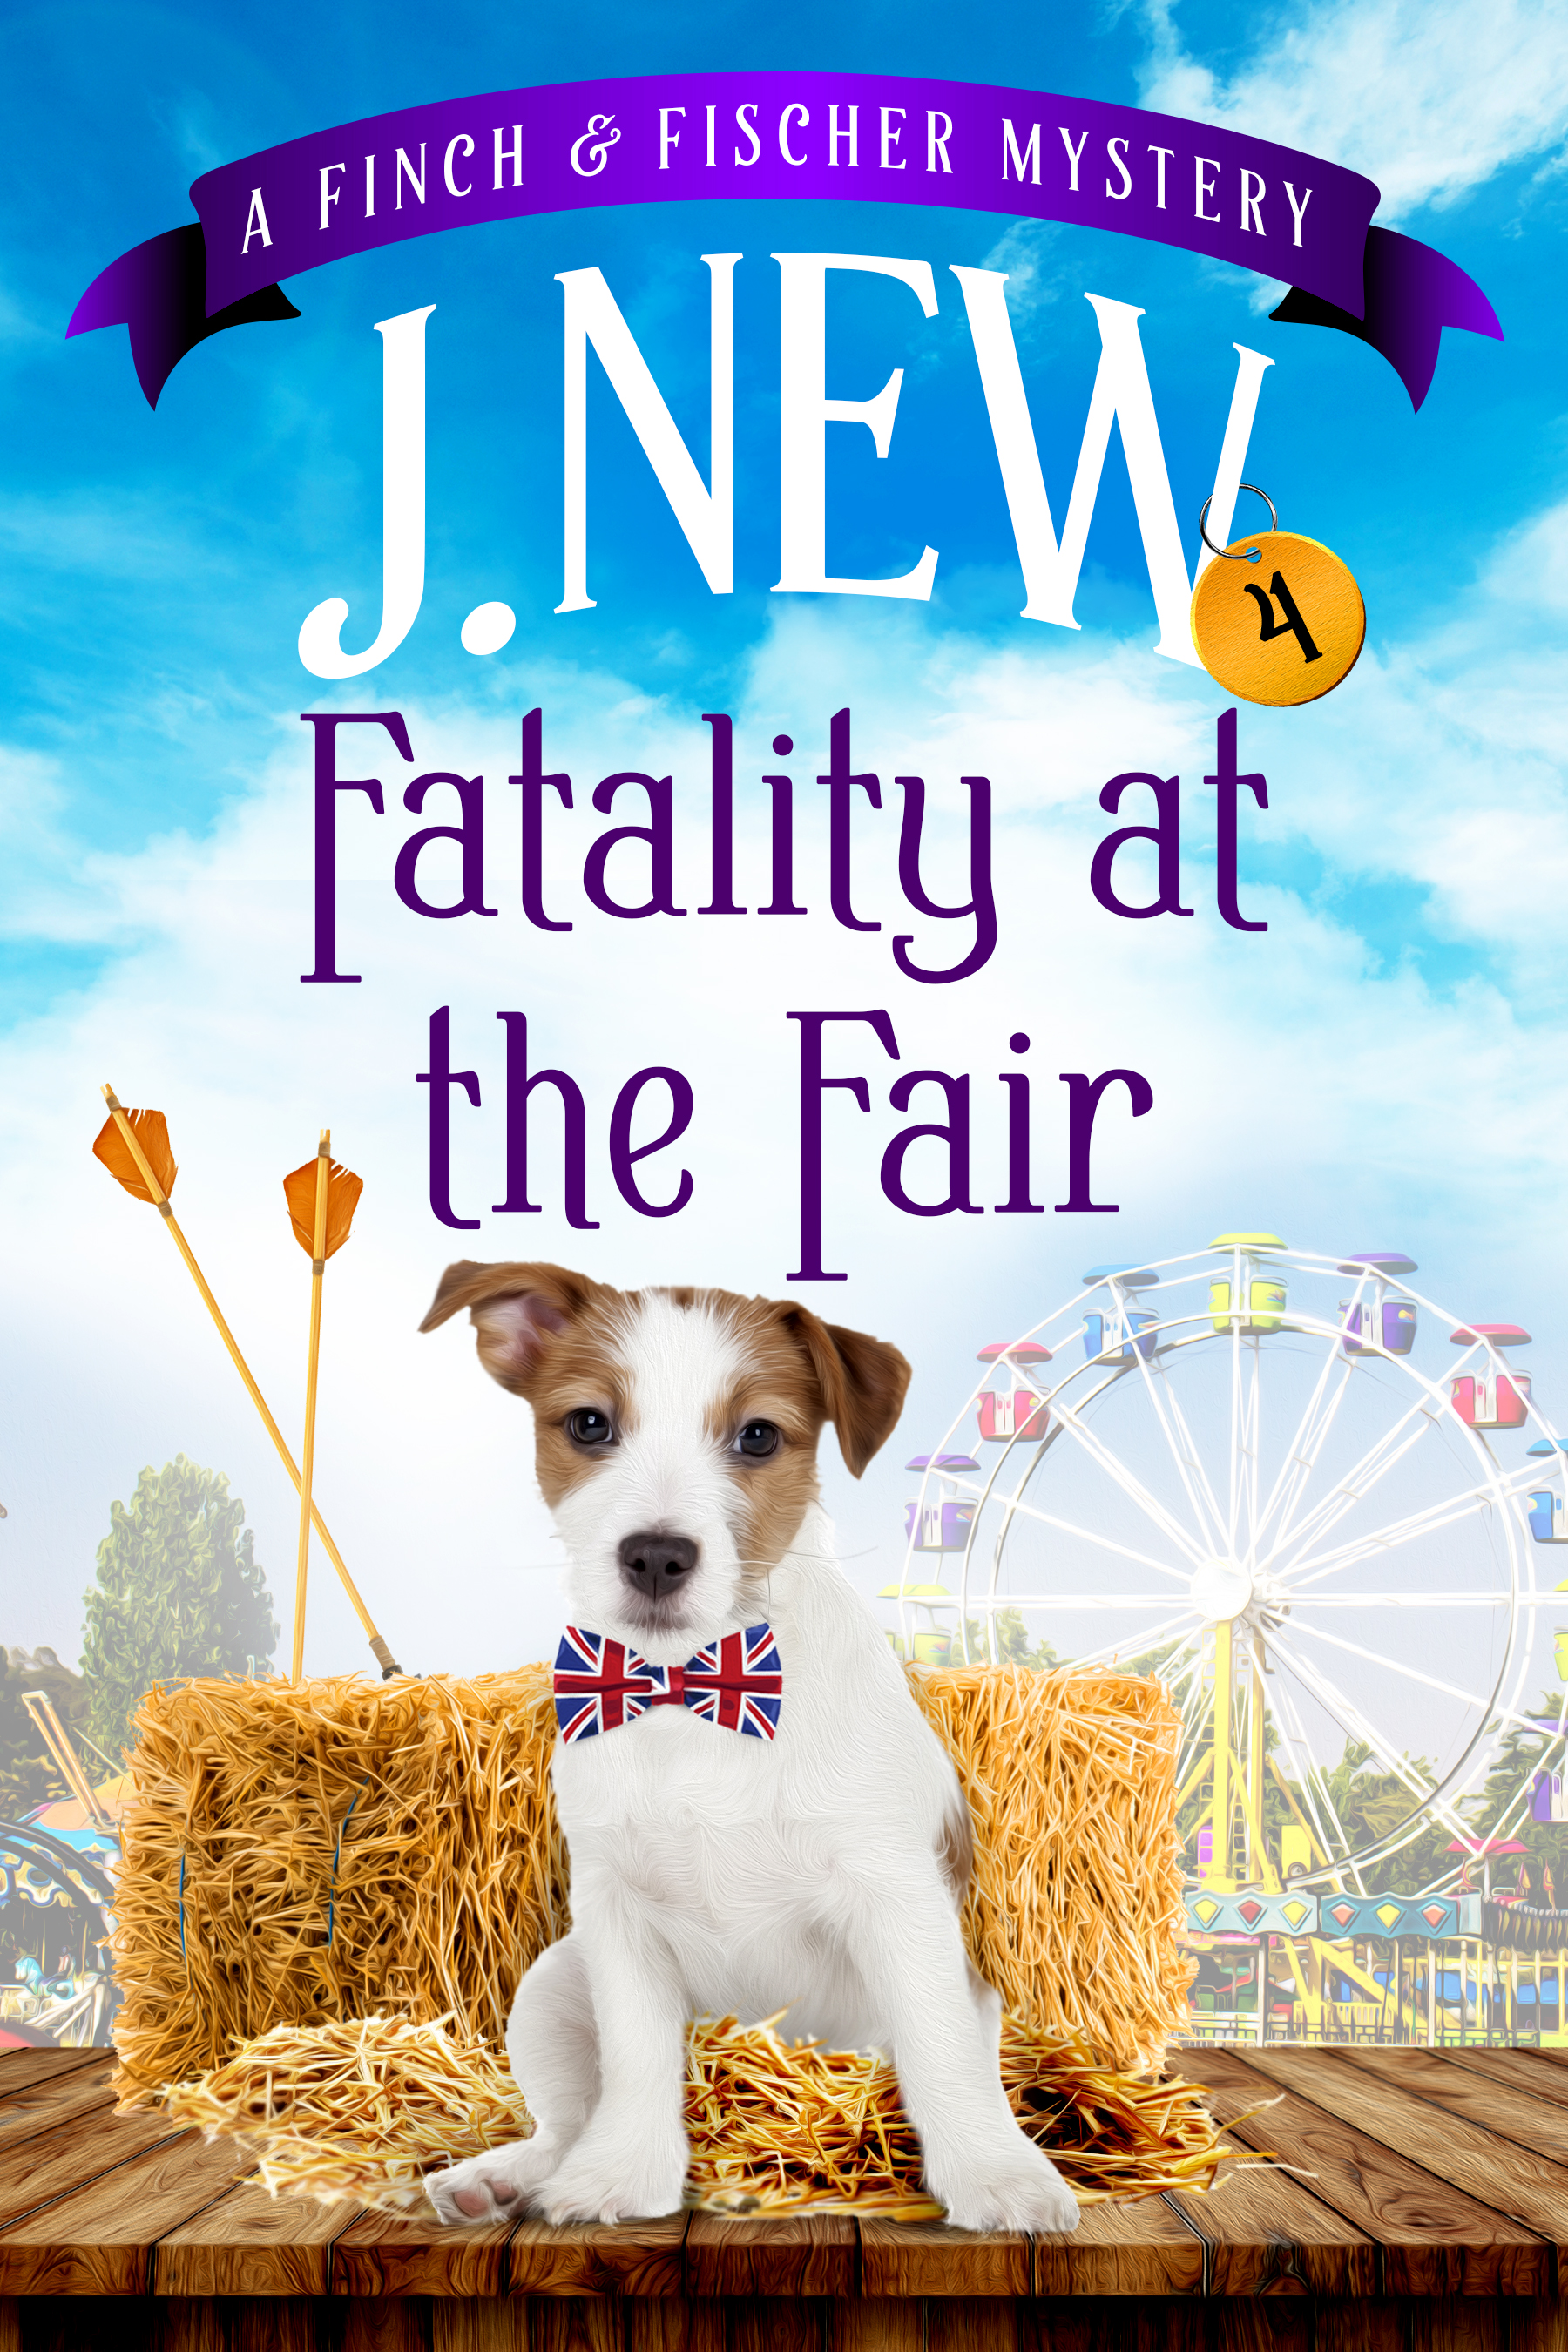 Fatality at the Fair is the fourth book in the popular Finch and Fischer British cozy mystery series by author J. New